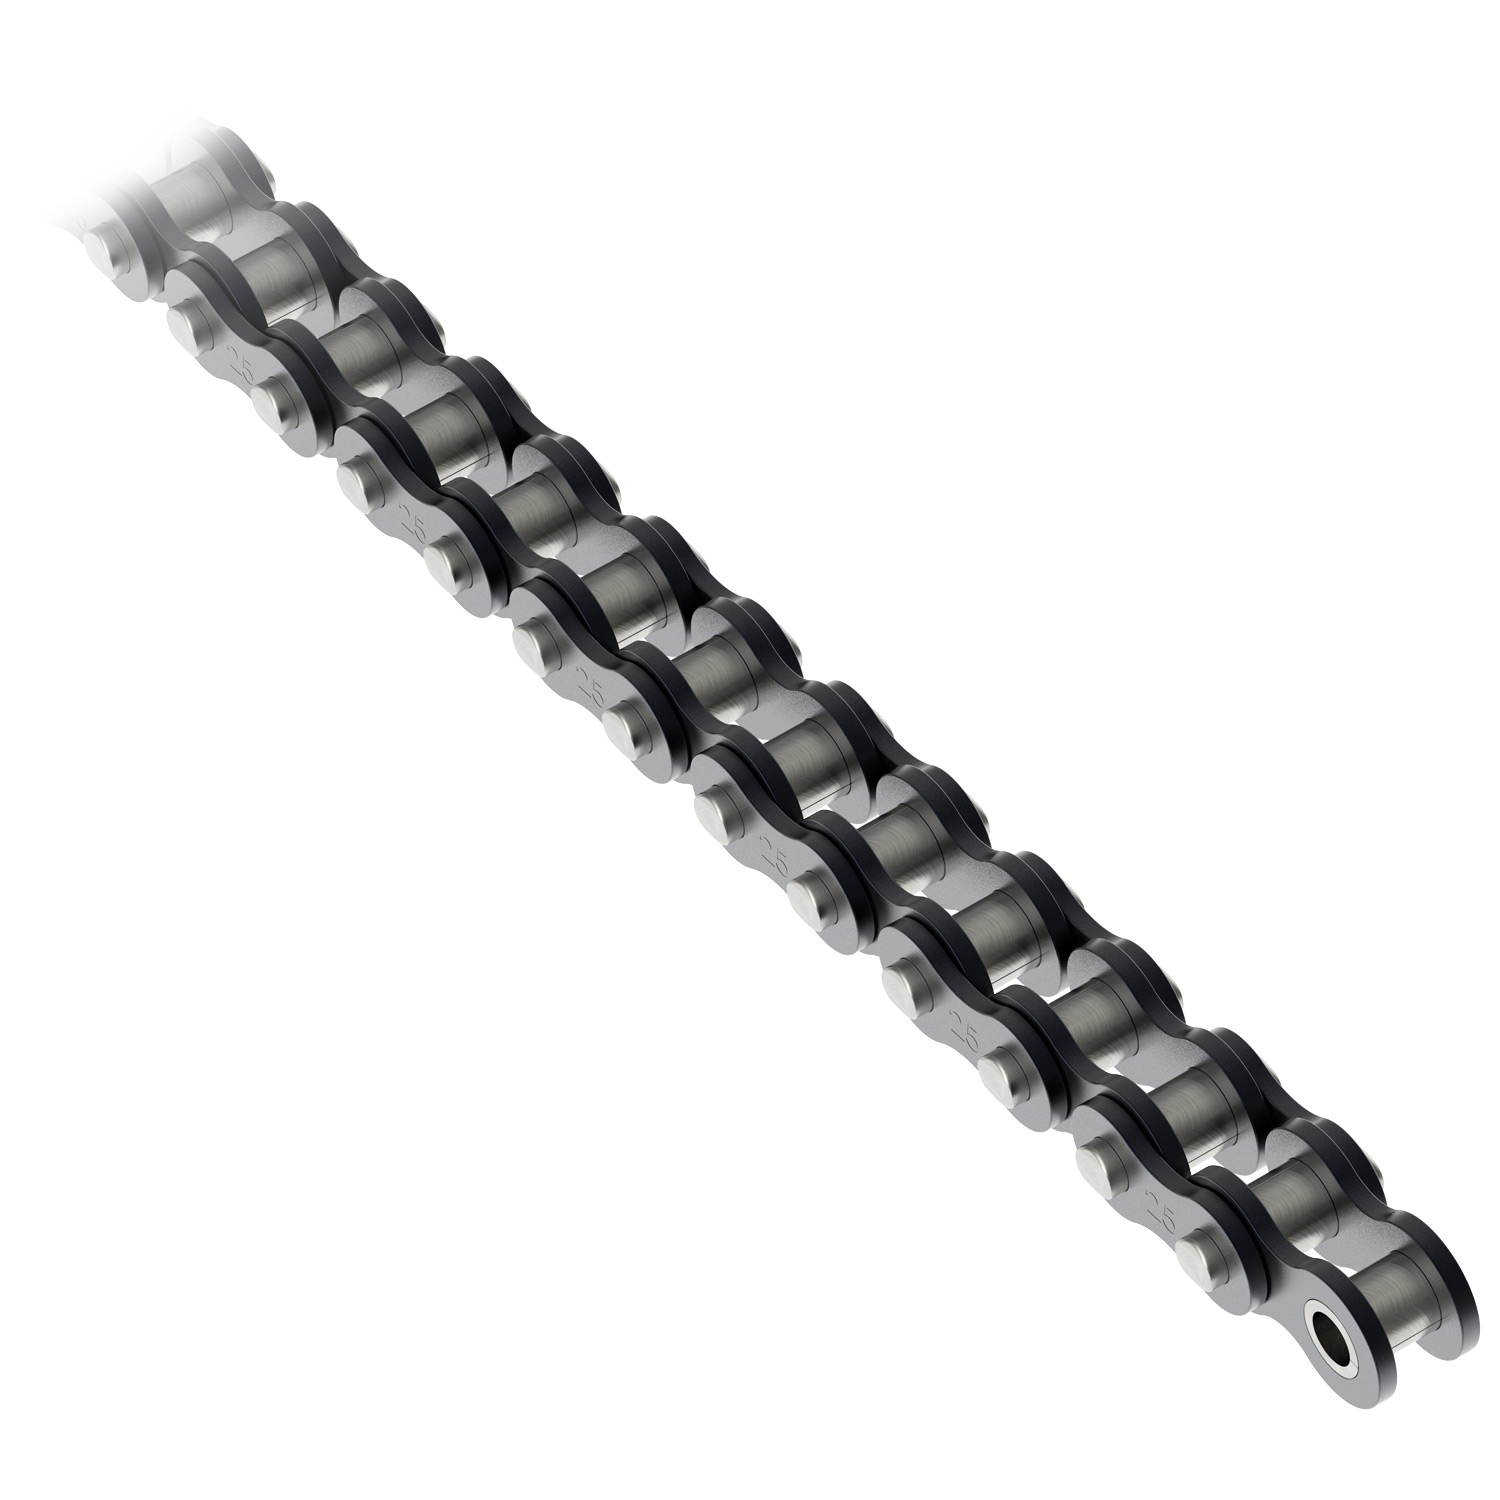 0.250 Pitch Metal Chain Add-and-Connect Link